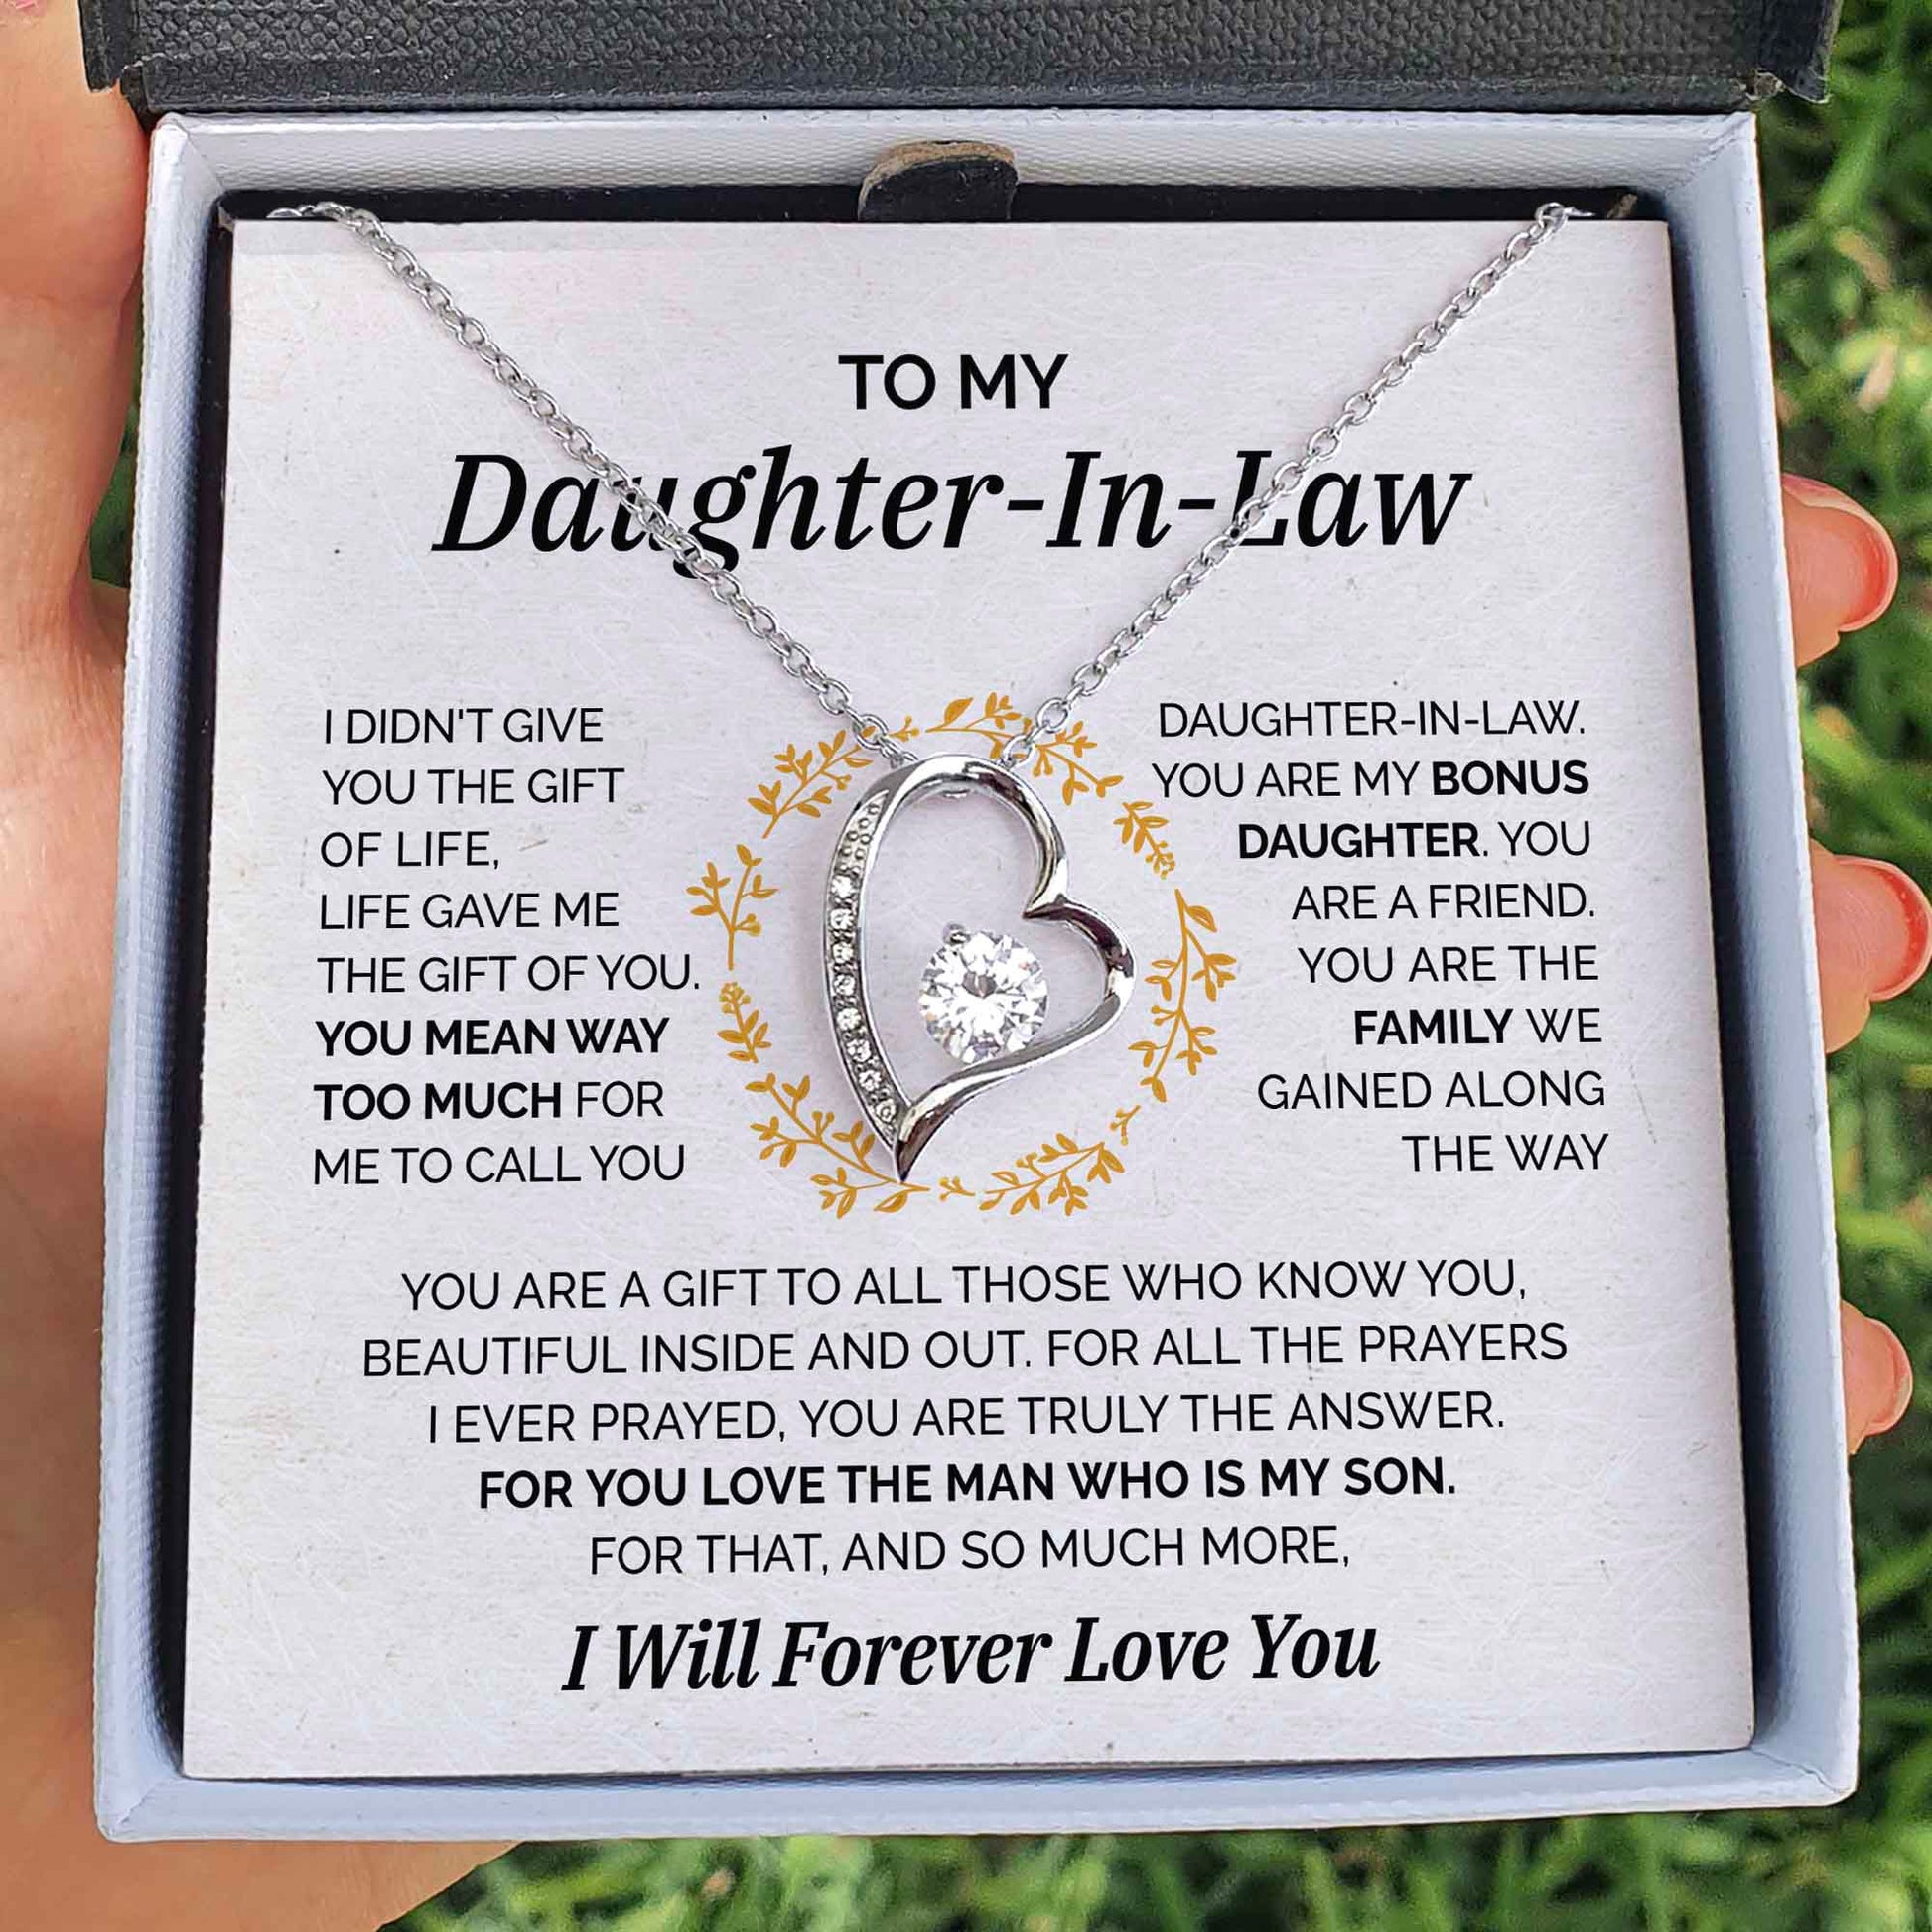 ShineOn Fulfillment Jewelry 14k White Gold Finish / Standard Box To my Daughter-In-Law - My Bonus Daughter - Forever Love Necklace